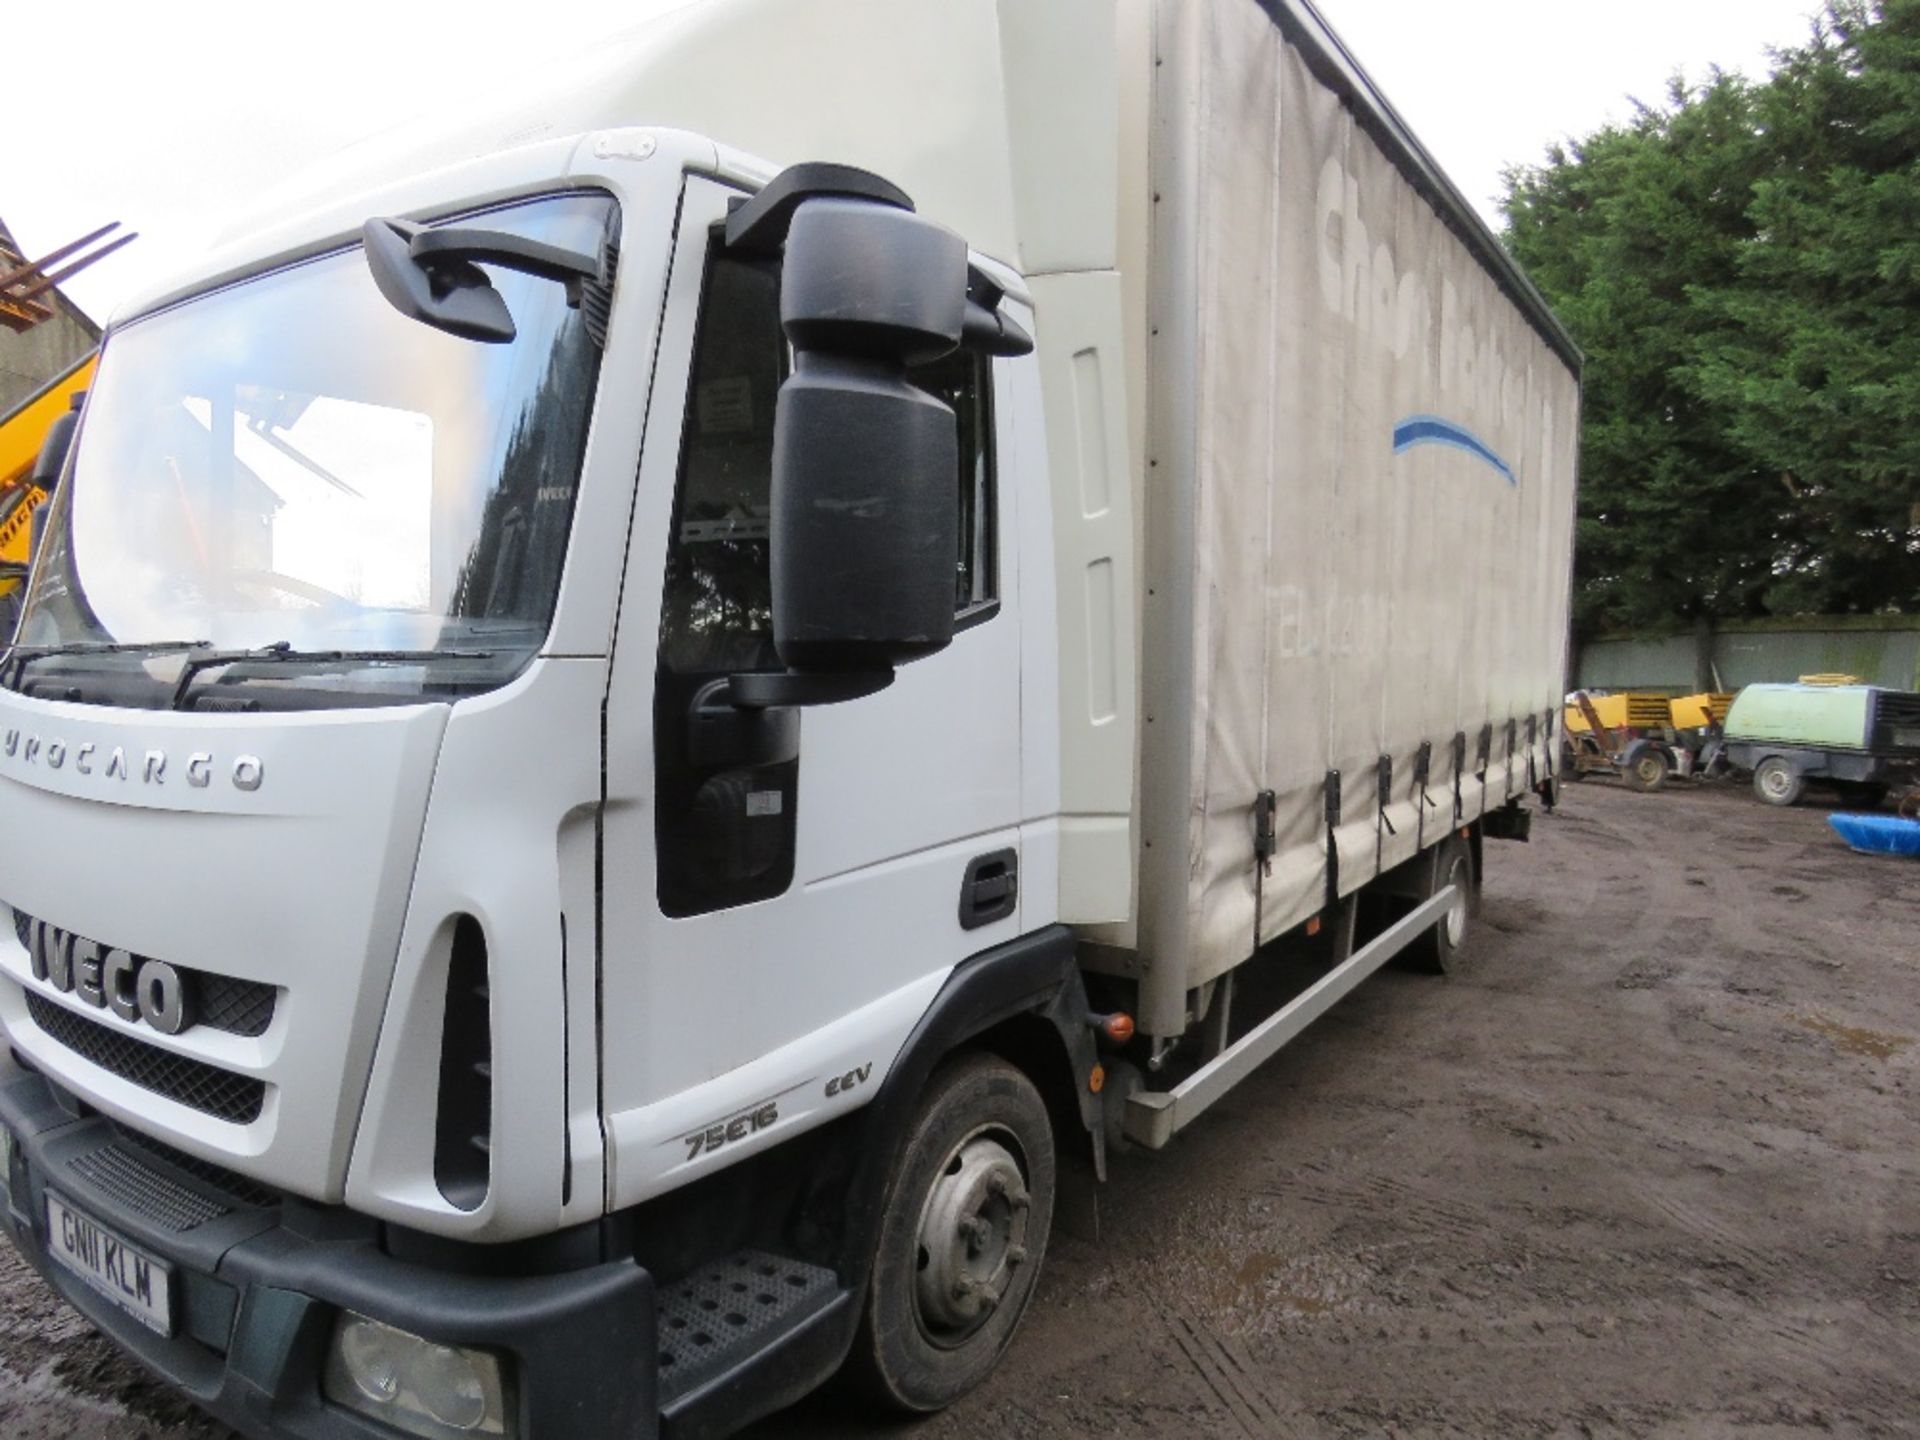 IVECO 75E16 CURTAINSIDE 7.5 TONNE LORRY, EURO 5 ENGINE. 415,161 REC KMS. AUTO GEARBOX. REG: GN11 - Image 3 of 9